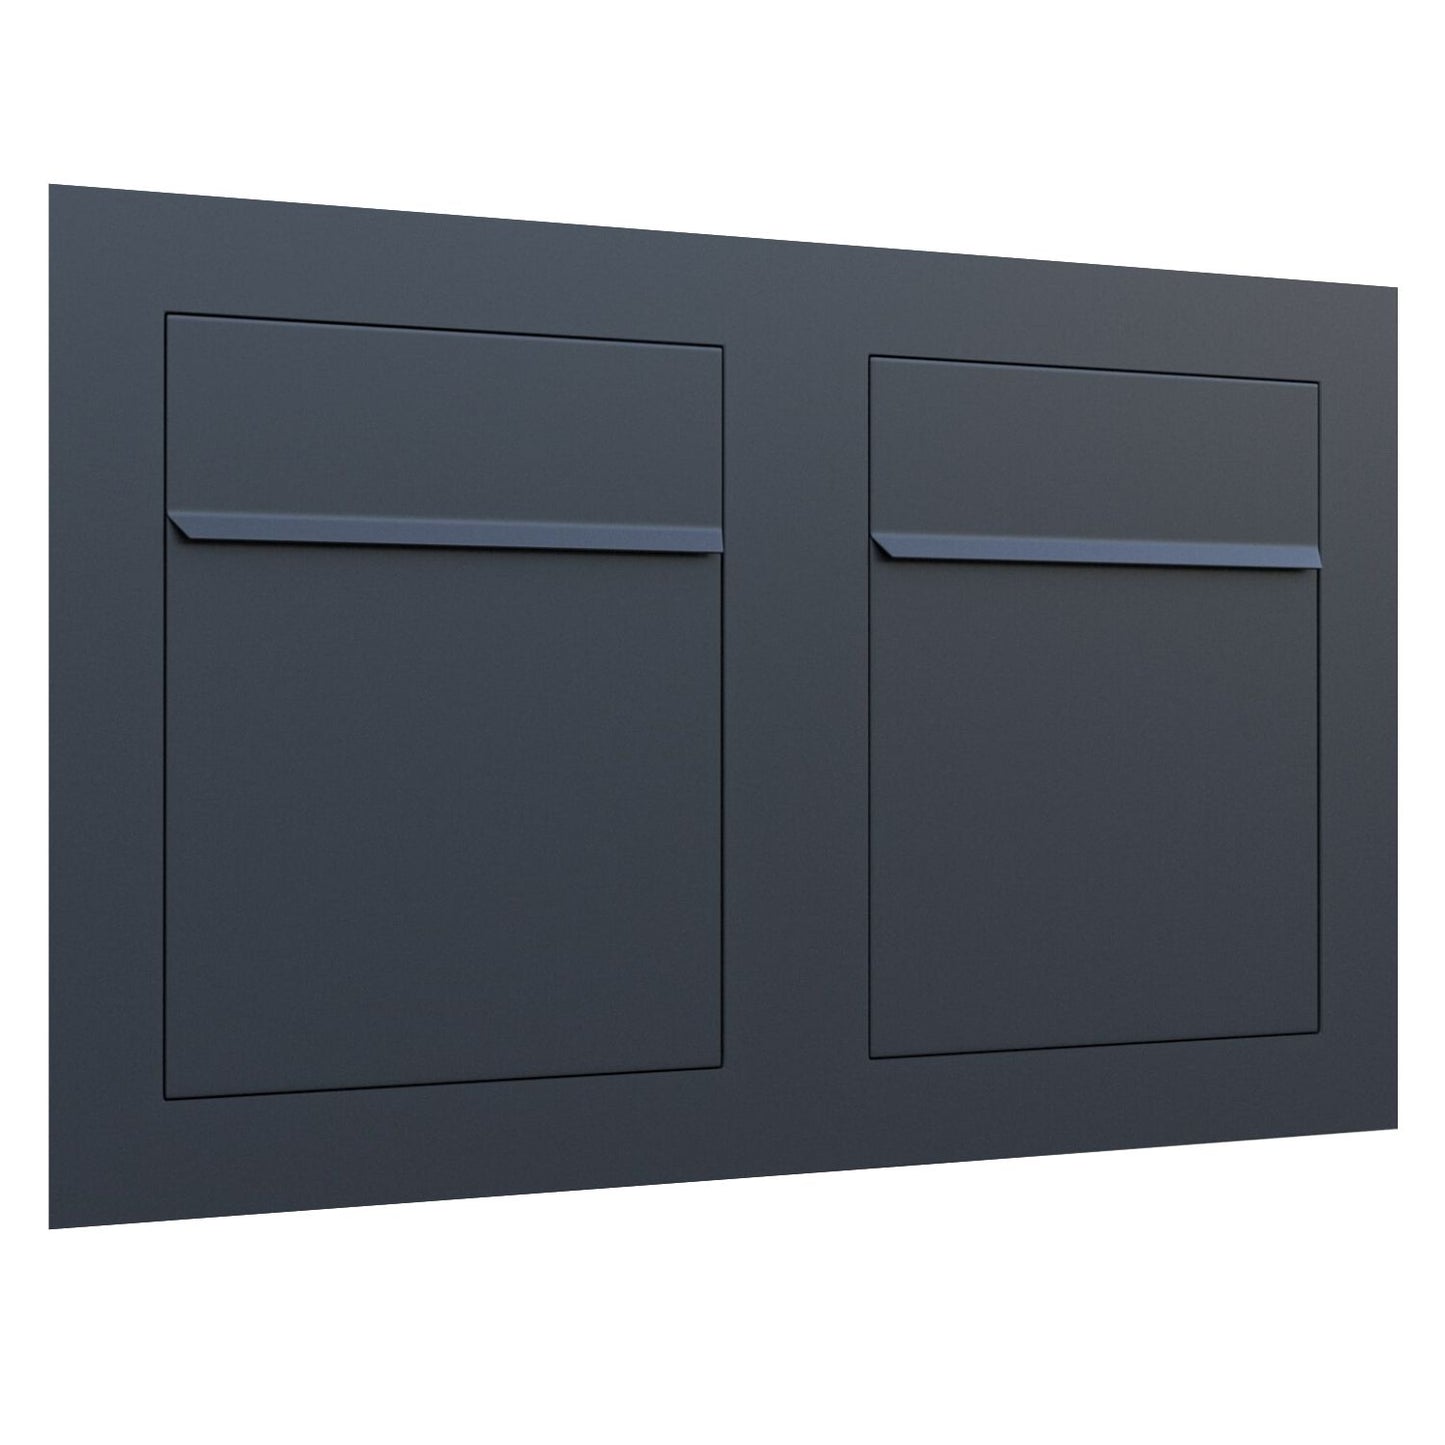 PROFILE 2 Built-in - Embedded or column multi-unit locking mailbox in black